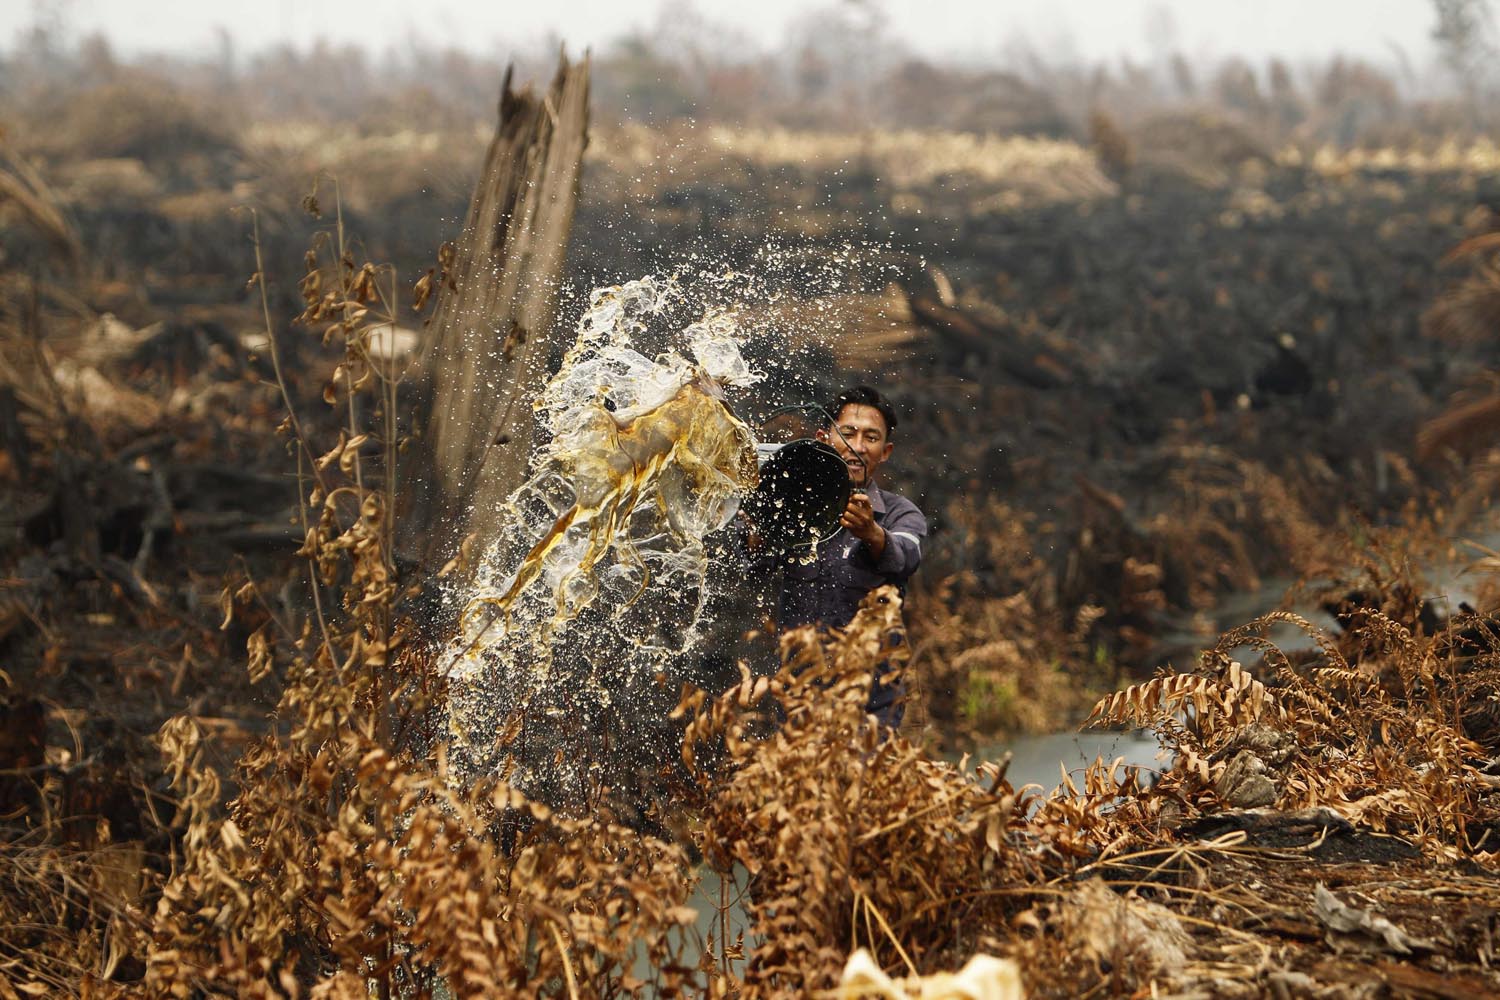 June 26, 2013. A worker pours water to extinguish a fire that is burning through his pineapple plantation in the haze-affected district of Tanah Putih in Rokan Hilir, Indonesia's Riau province.